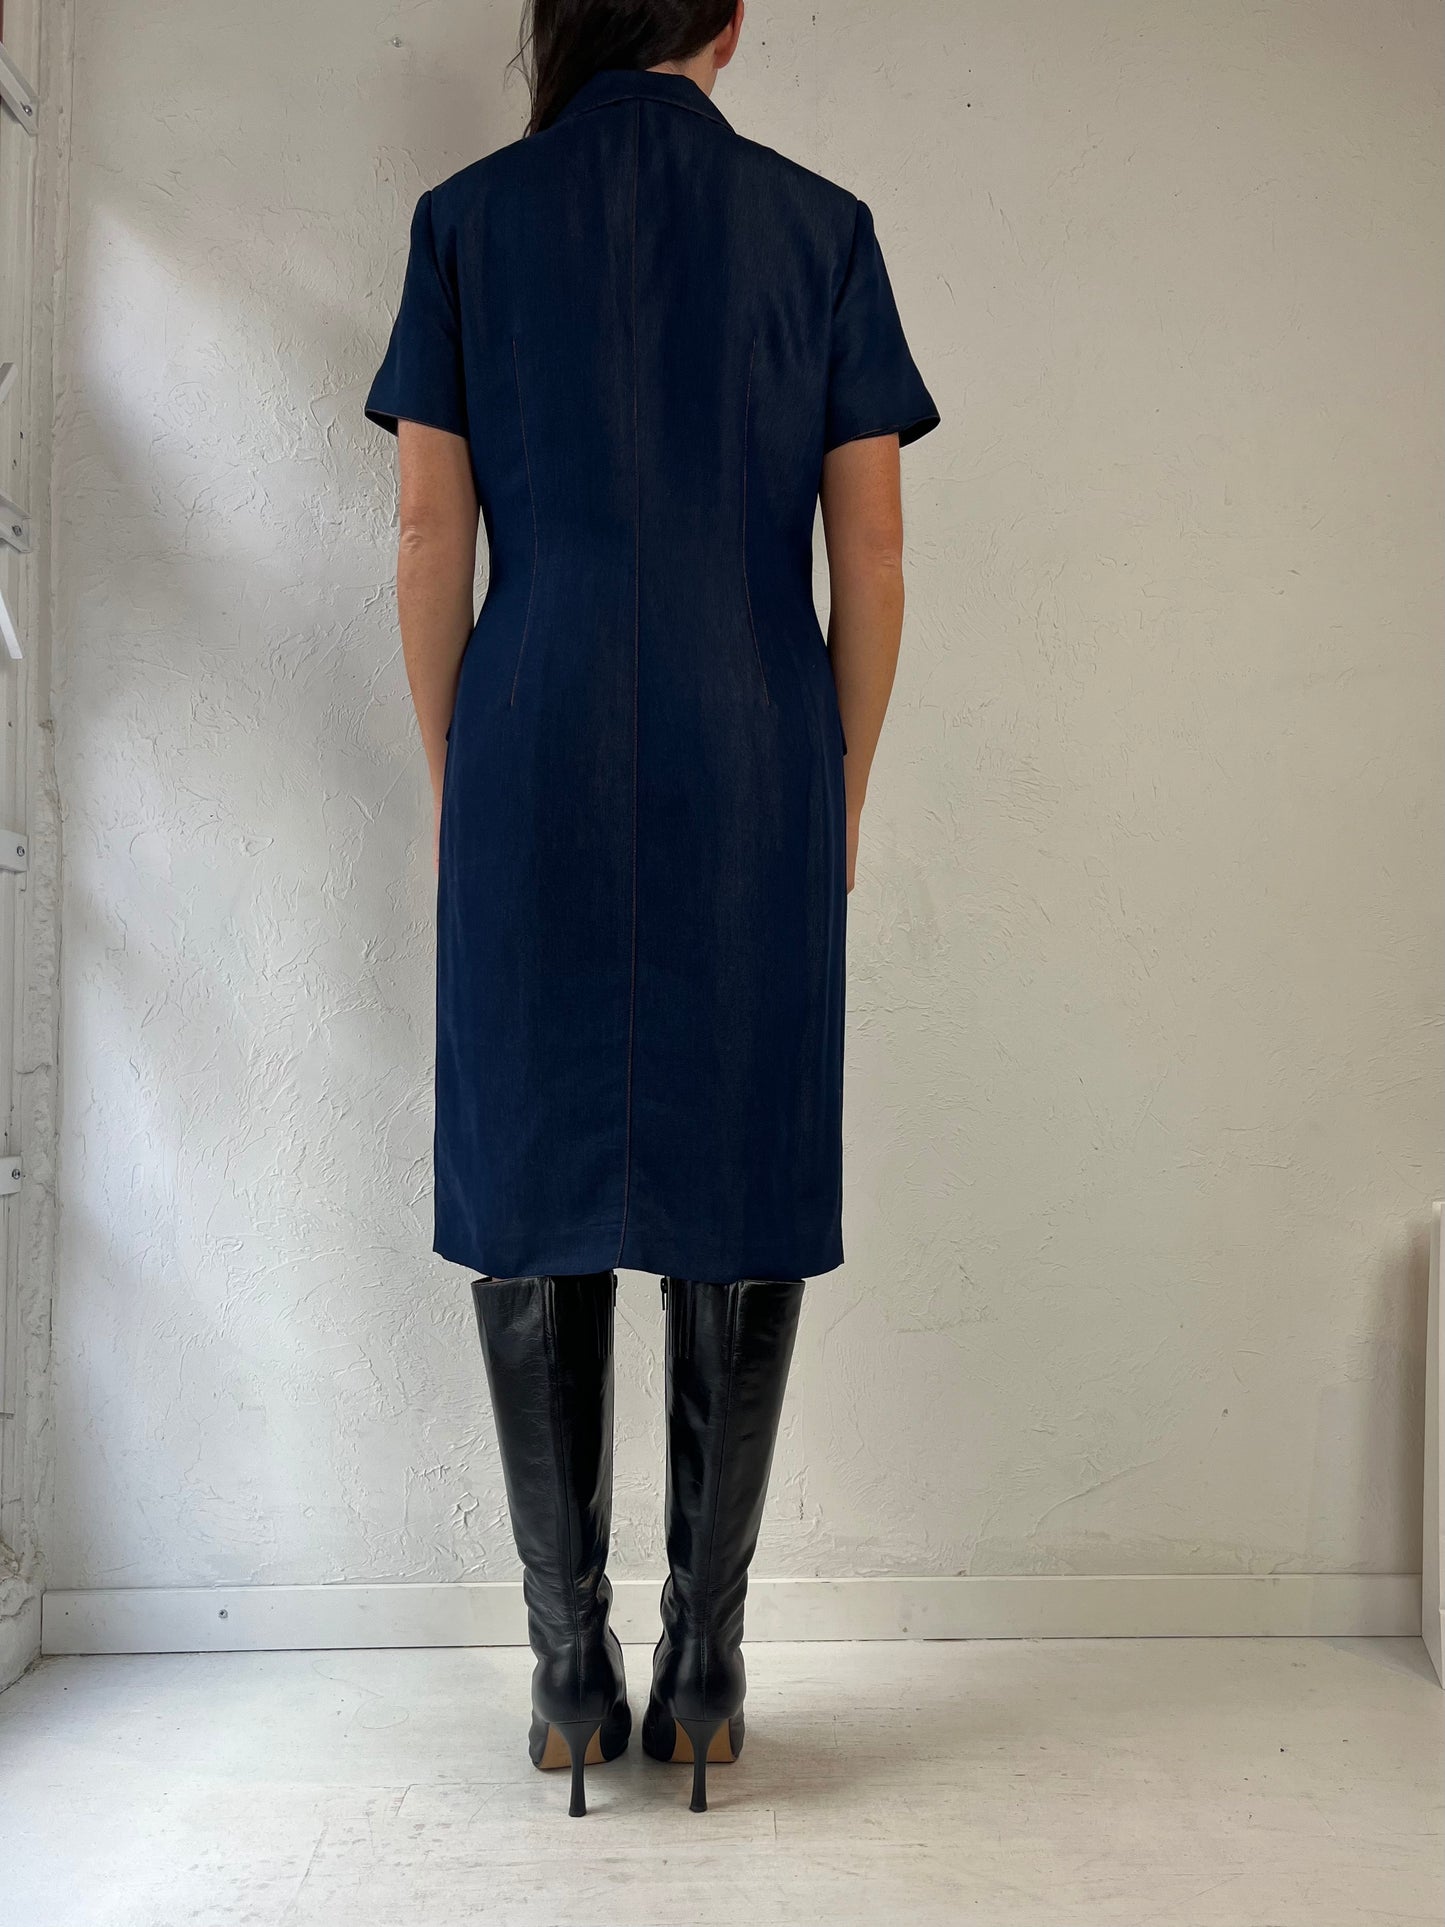 90s 'Saks Fifth Ave' Navy Blue Button Up Collared  Dress / Medium